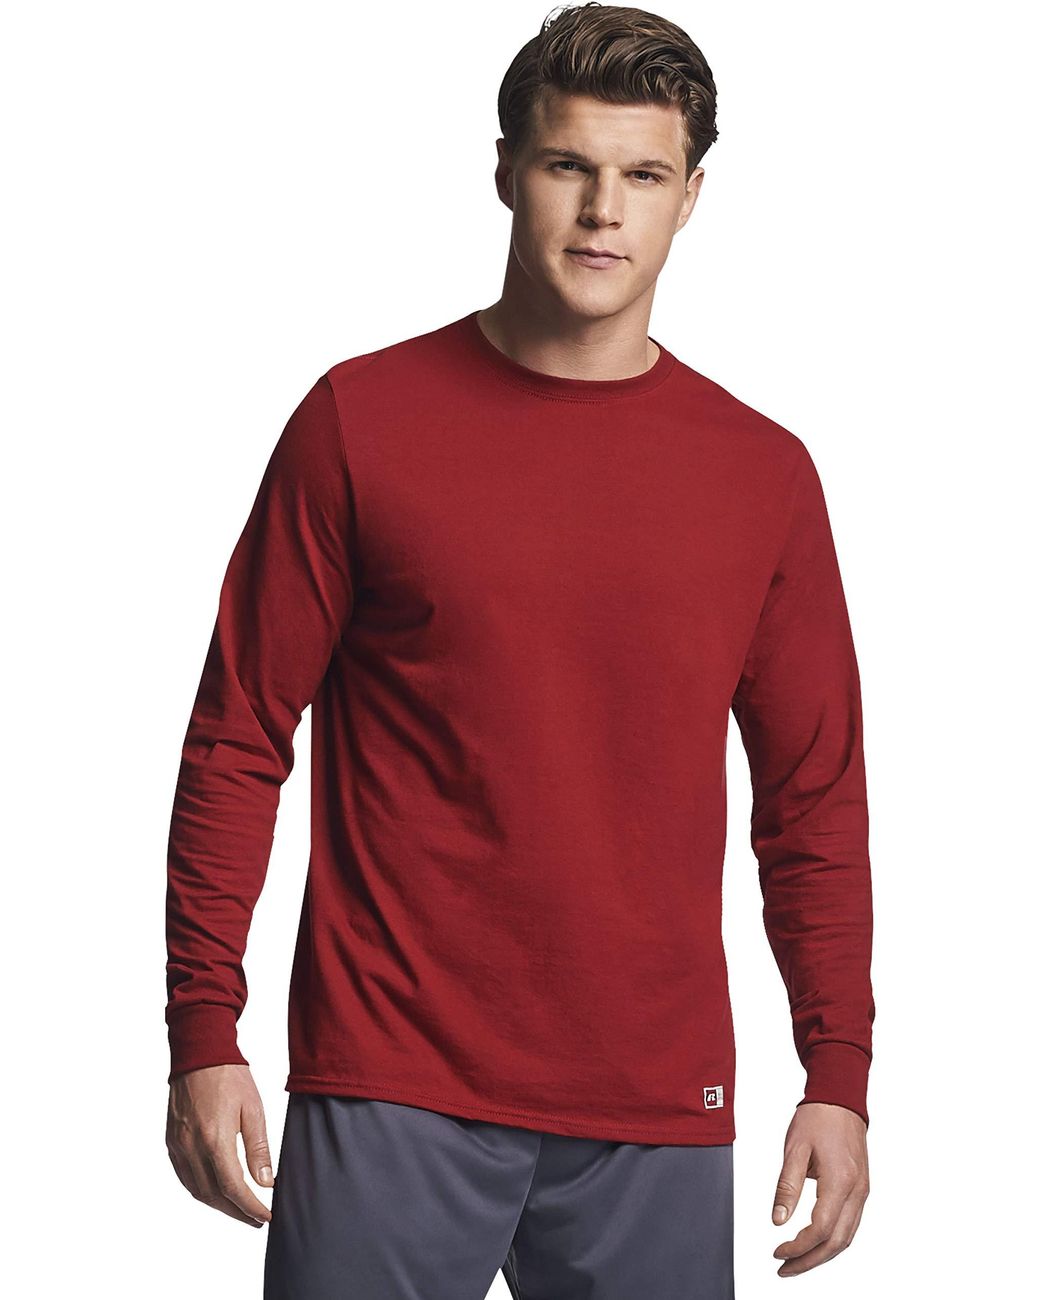 Russell Athletic Cotton Long Sleeve T-shirts in Red for Men - Save 17% ...